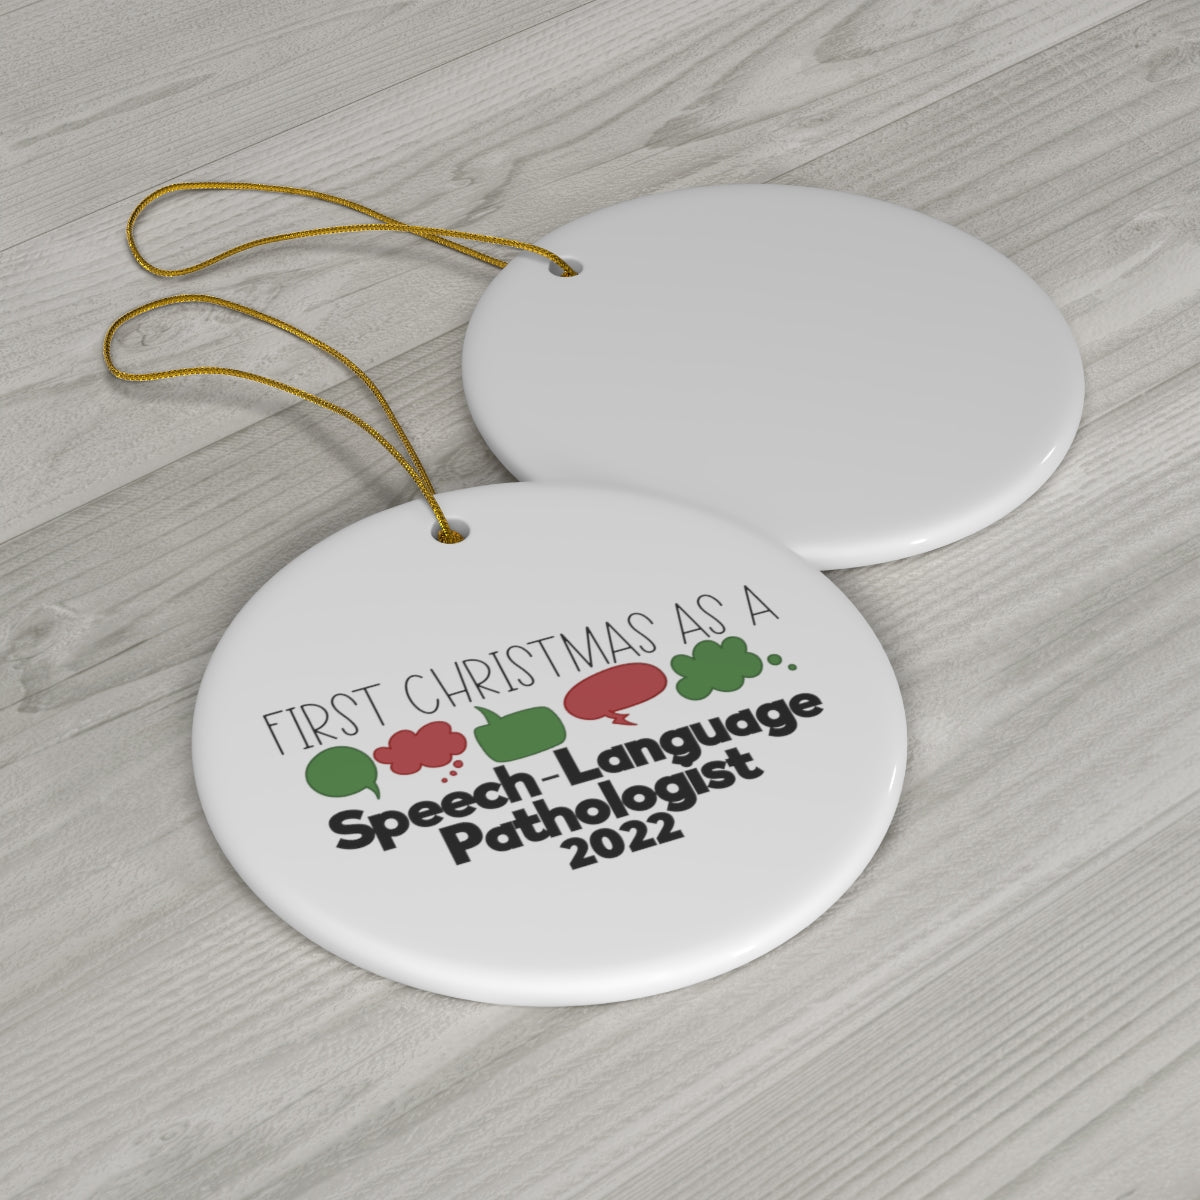 Load image into Gallery viewer, First Christmas as an SLP Ornament
